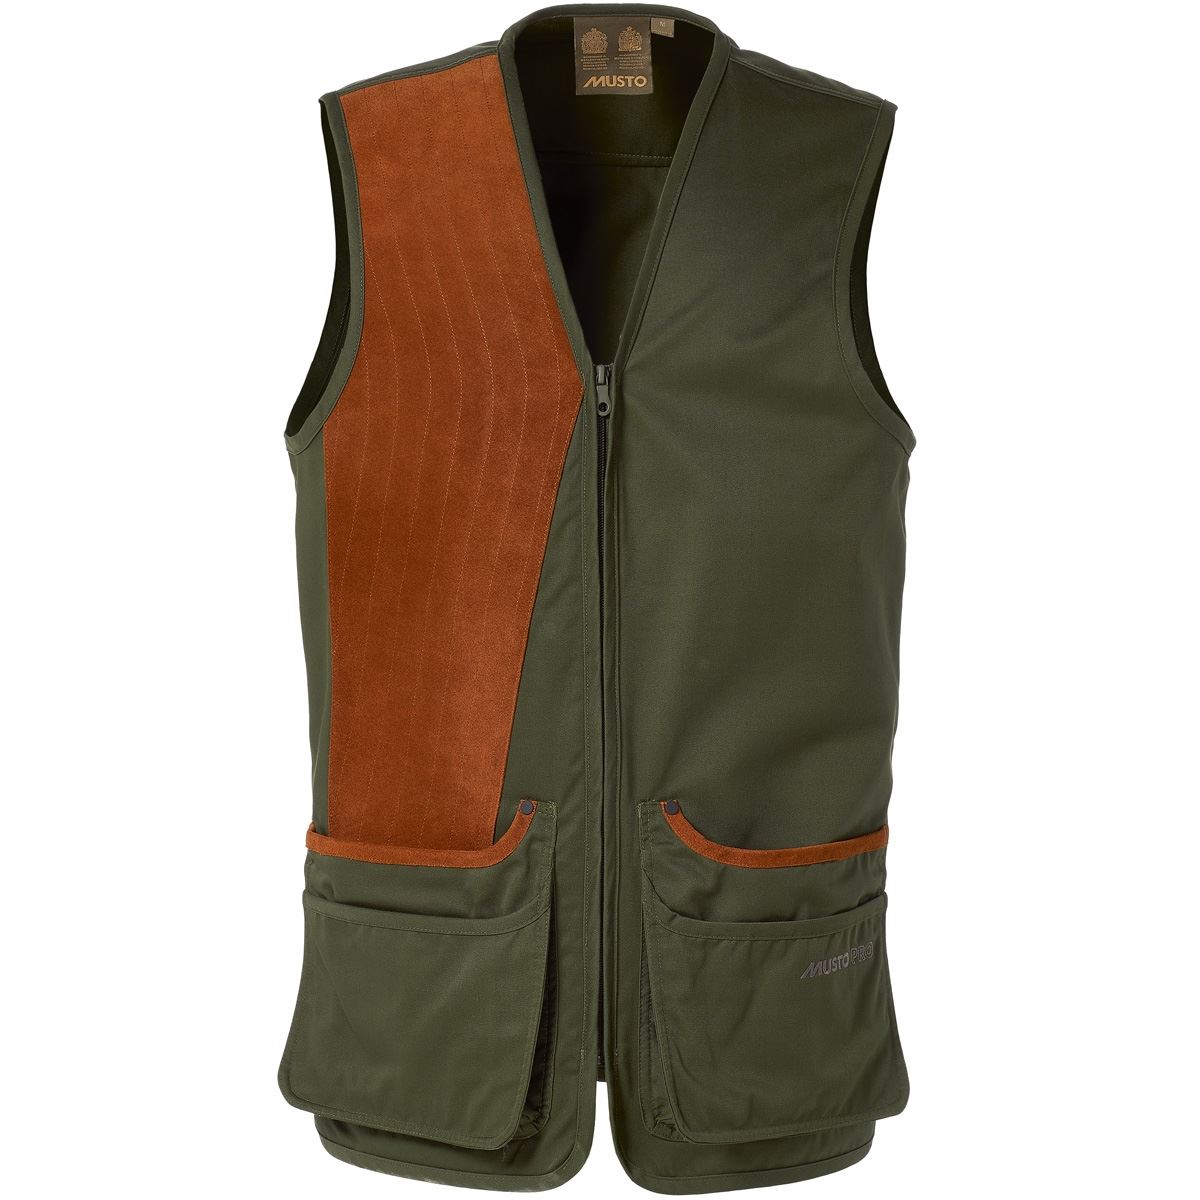 Does the Musto shooting vest have any extra durability features?